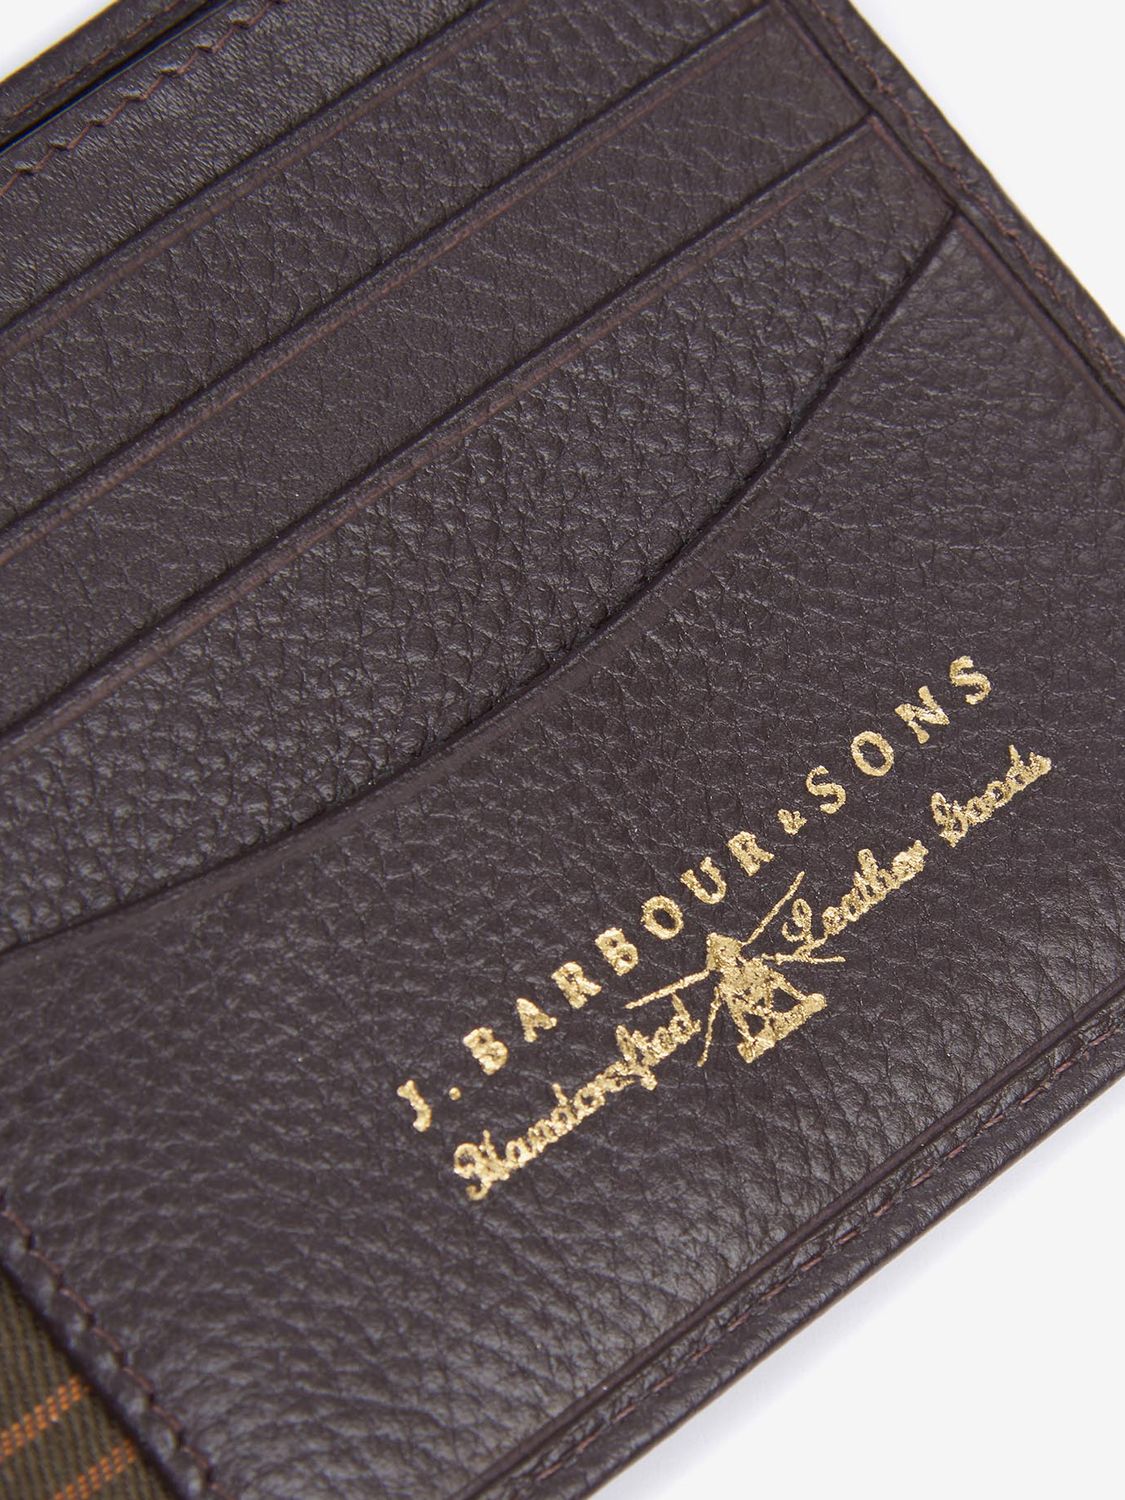 Leather Passport Wallet (Color: Brompton Brown, Color Family: Brown)